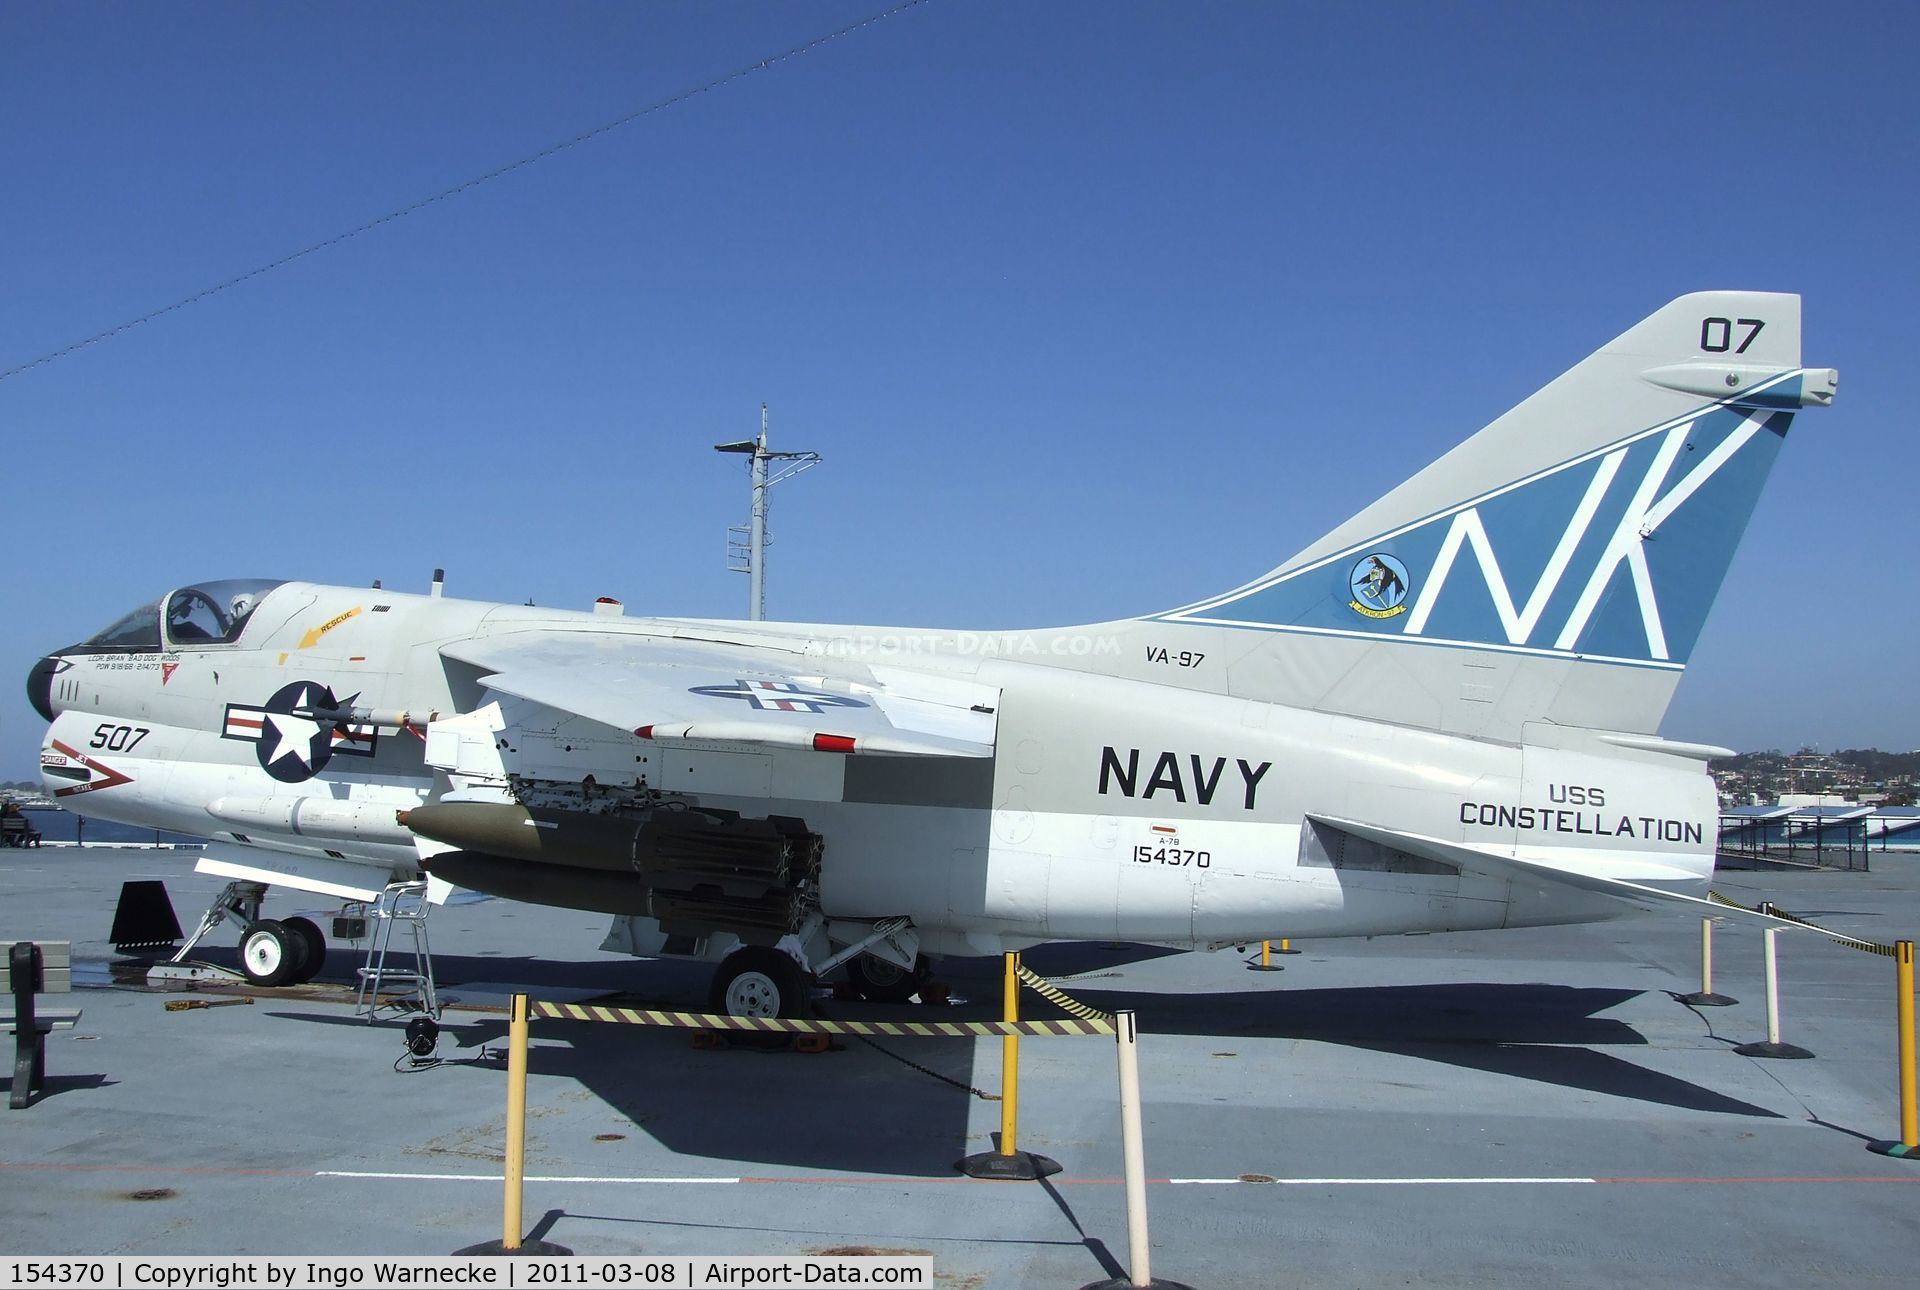 154370, LTV A-7B Corsair II C/N B-010, LTV A-7B Corsair II on the flight deck of the USS Midway Museum, San Diego CA